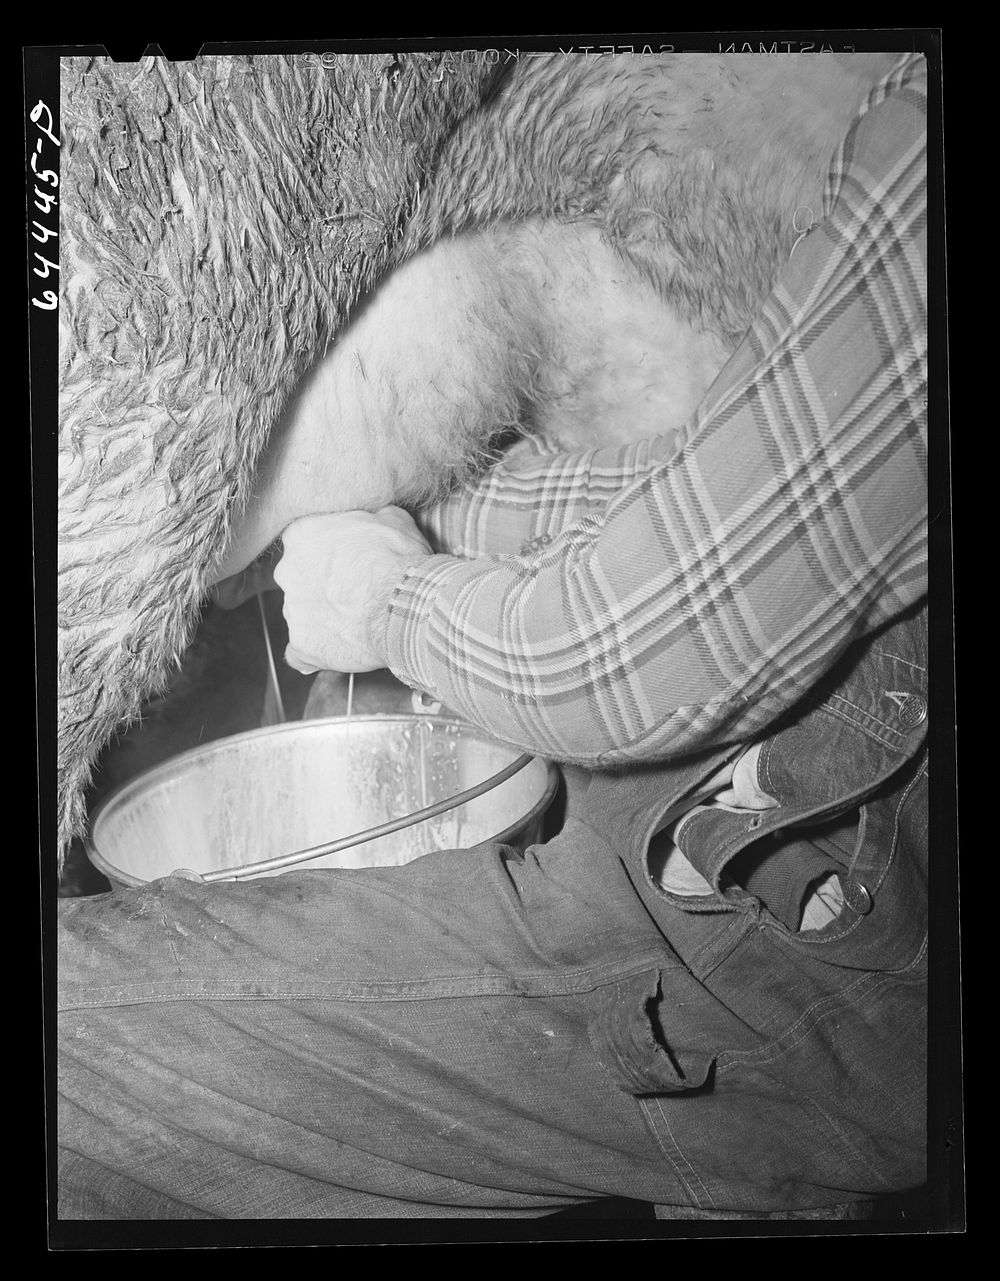 [Untitled photo, possibly related to: Meeker County, Minnesota. Pat McRaith milking. He is milking seventeen cows this…